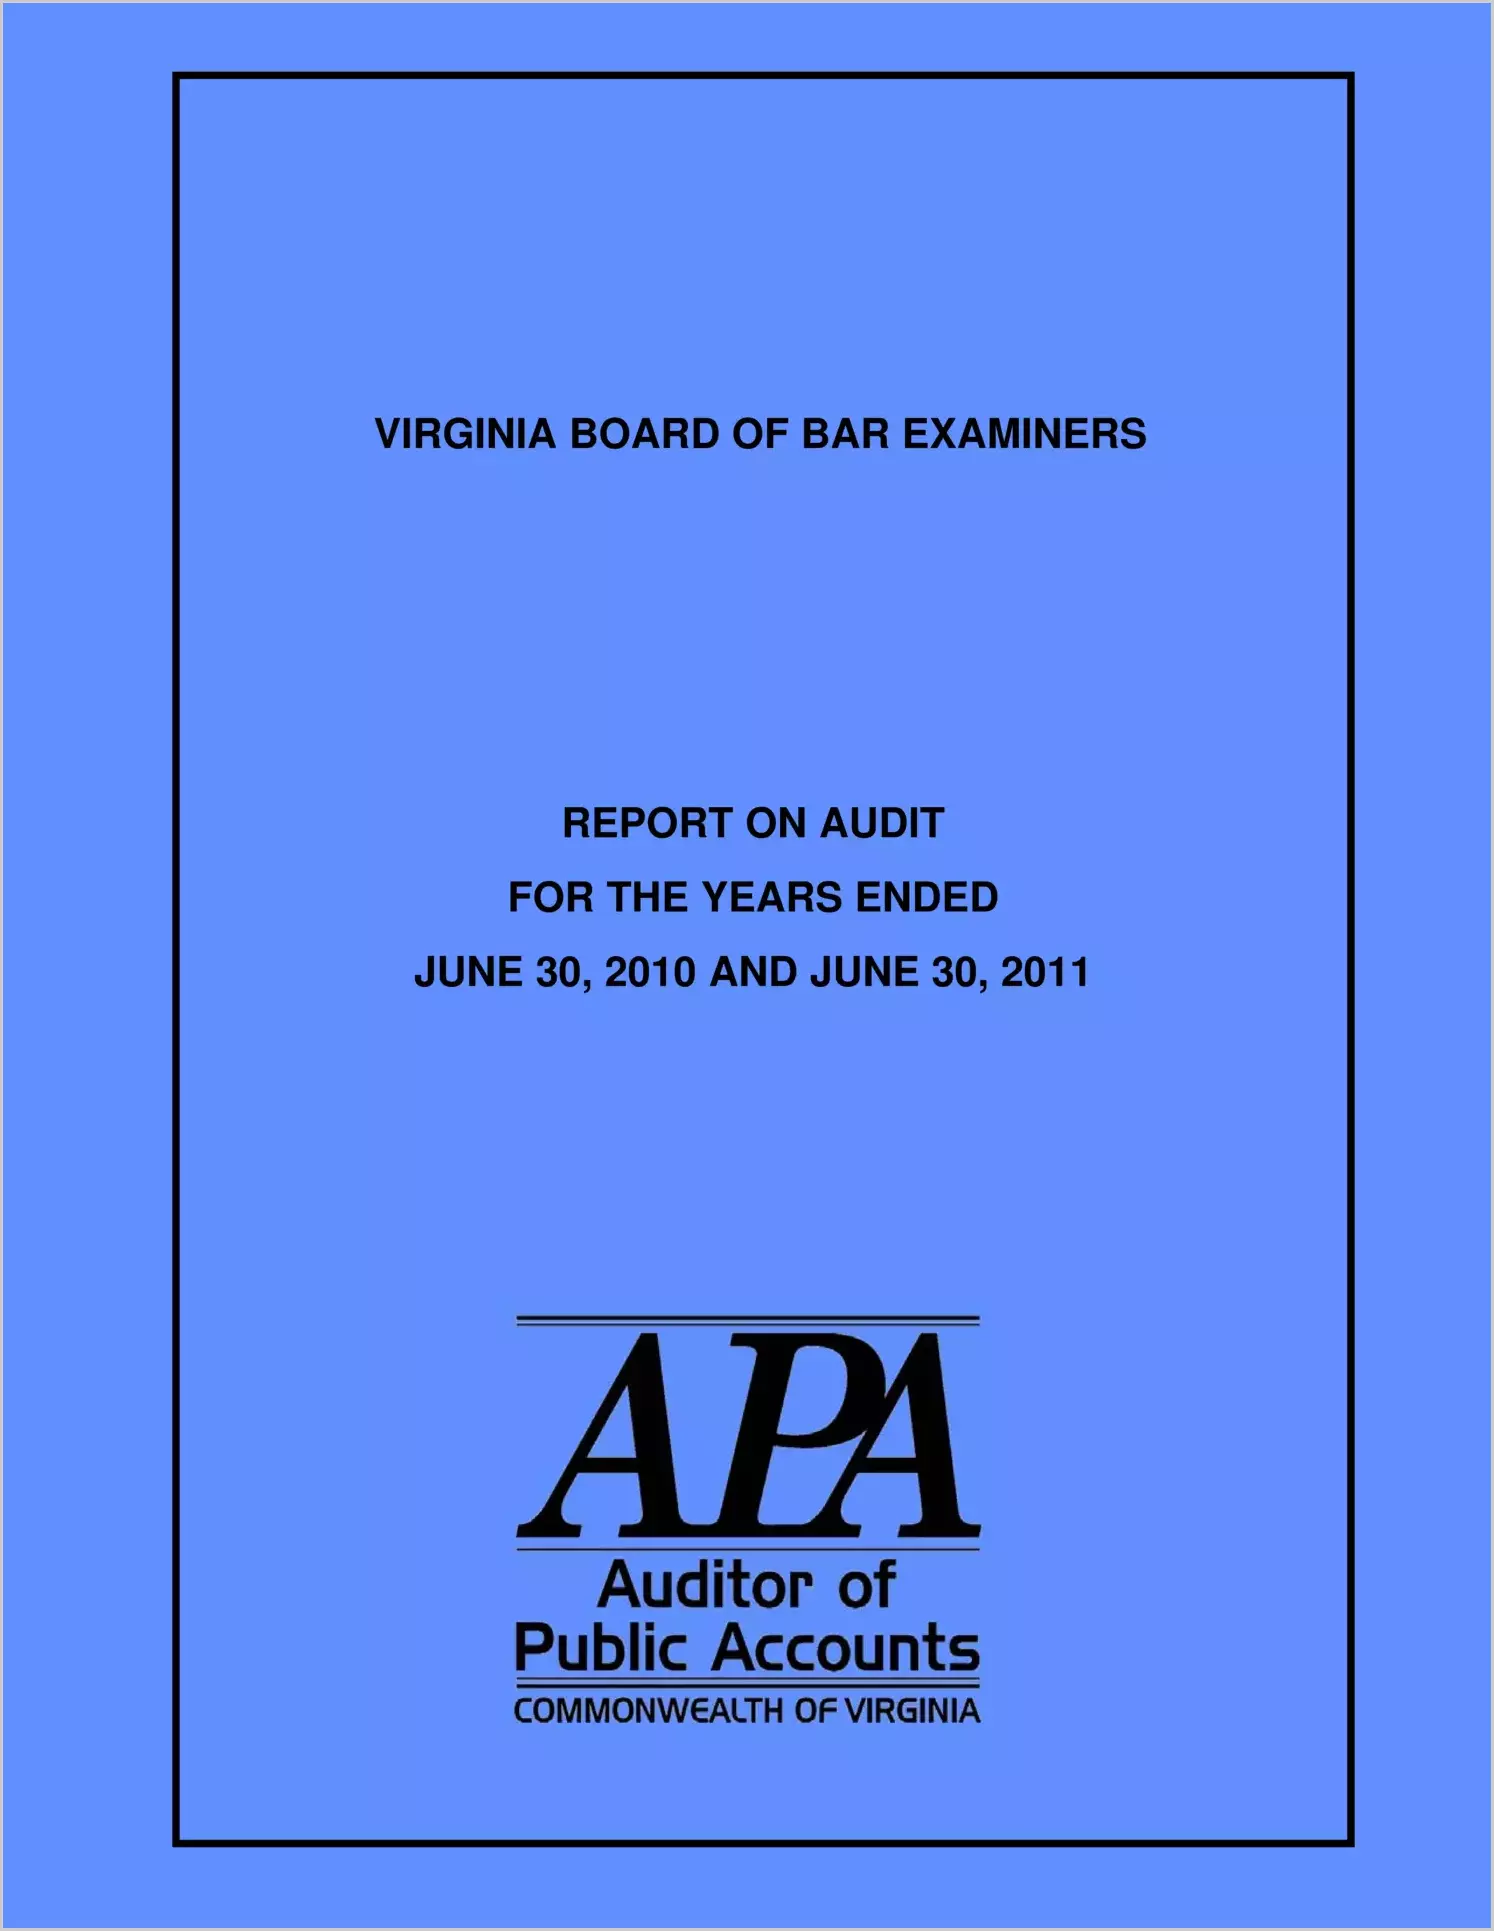 Virginia Board of Bar Examiners Report on Audit for the Years Ended June 30, 2010 and June 30, 2011